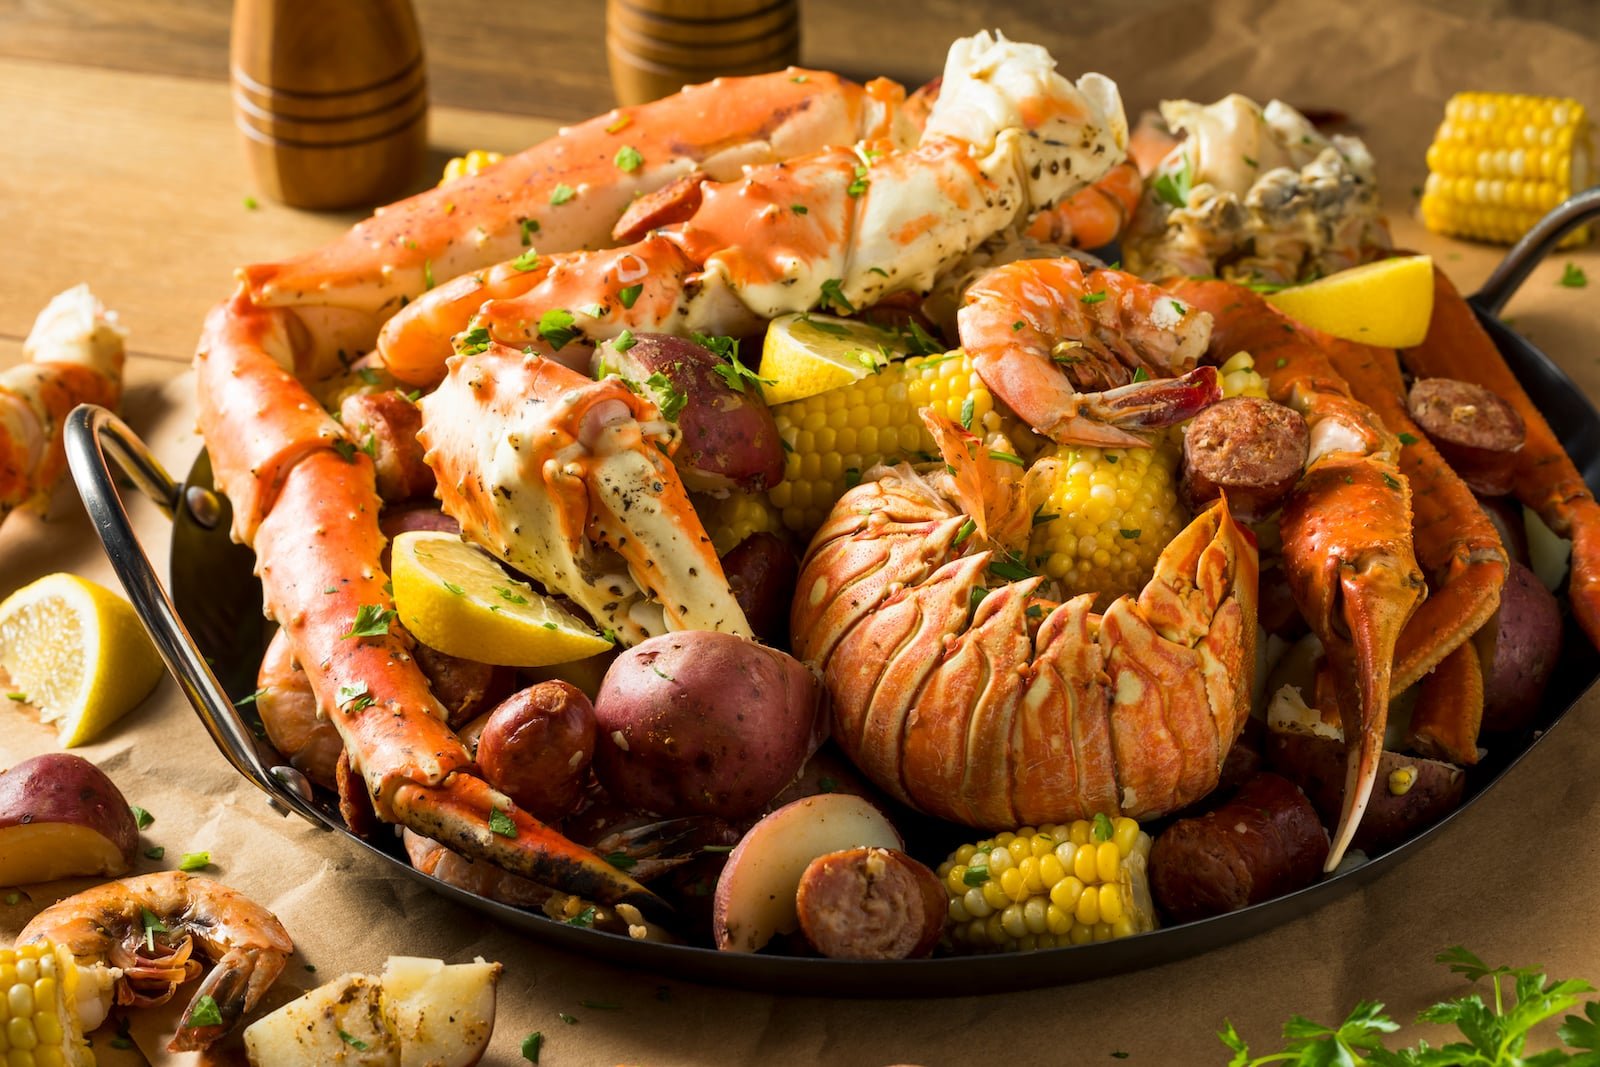 Image Credit: Shutterstock / Brent Hofacker <p><span>Experience the culinary bounty of Galicia, a lush region in northwest Spain known for its pristine coastline, verdant landscapes, and exceptional seafood. Delight in Galicia’s tapas specialties like pulpo a la gallega, empanada gallega, and percebes while savoring the fresh flavors of the sea and the warmth of Galician hospitality.</span></p>